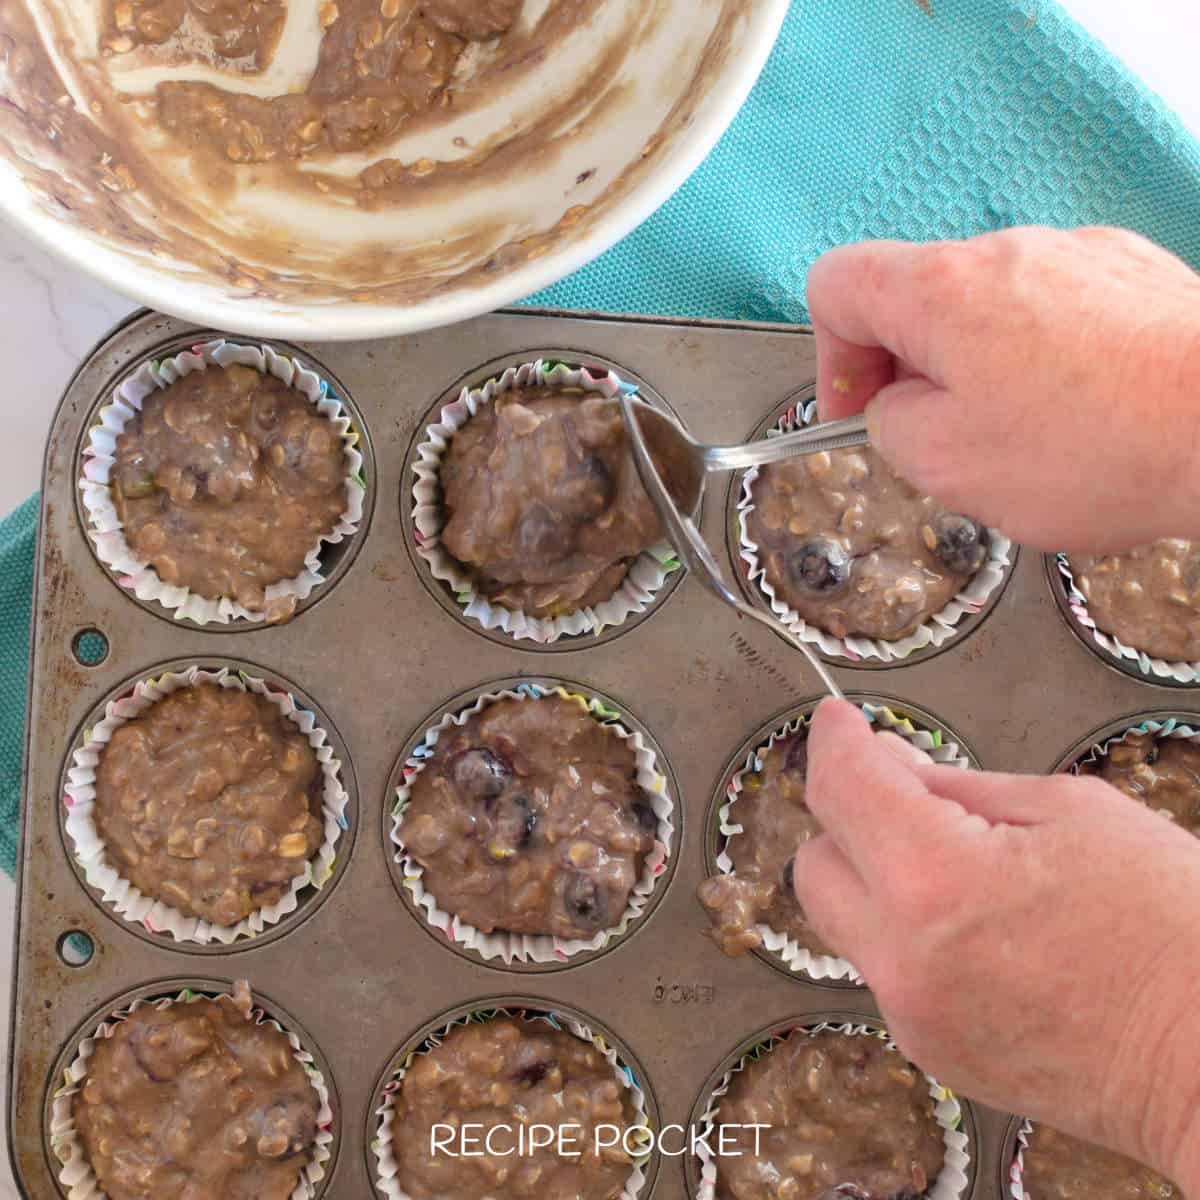 Muffin batter being spooned into paper cases in a muffin tin.